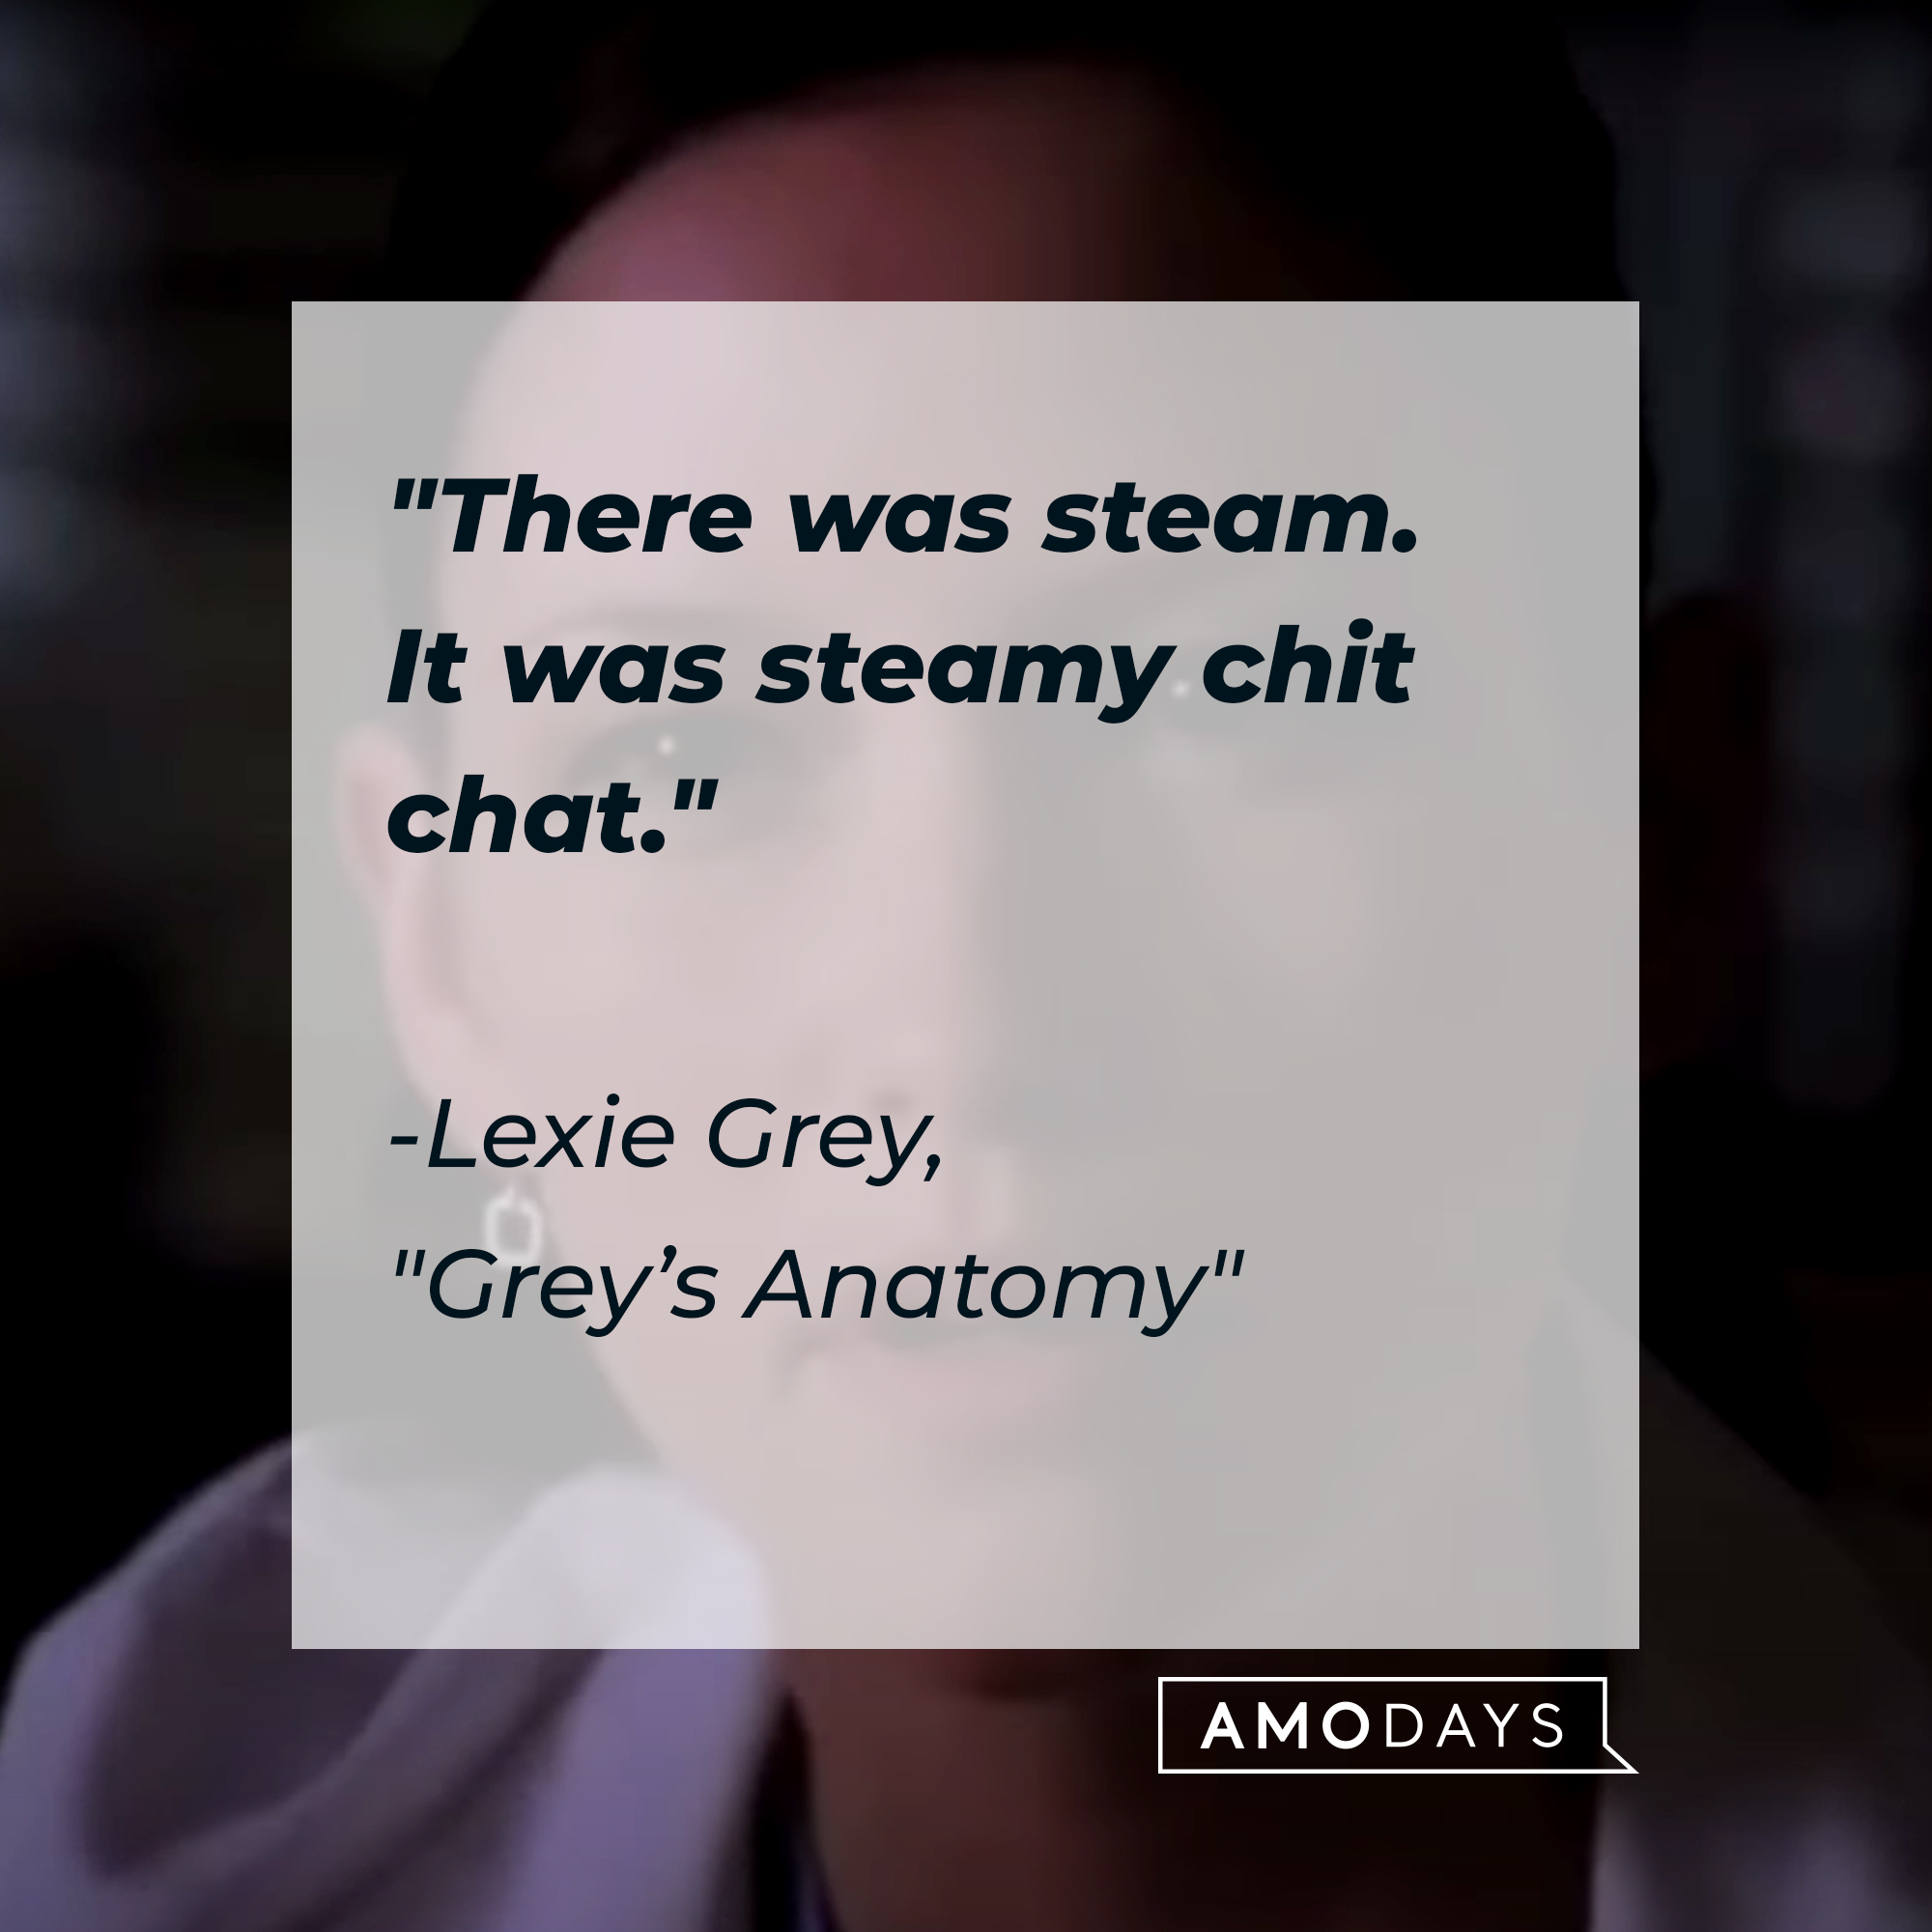 Lexie Grey with her quote: "There was steam. It was steamy chit chat." | Source: Facebook.com/GreysAnatomy